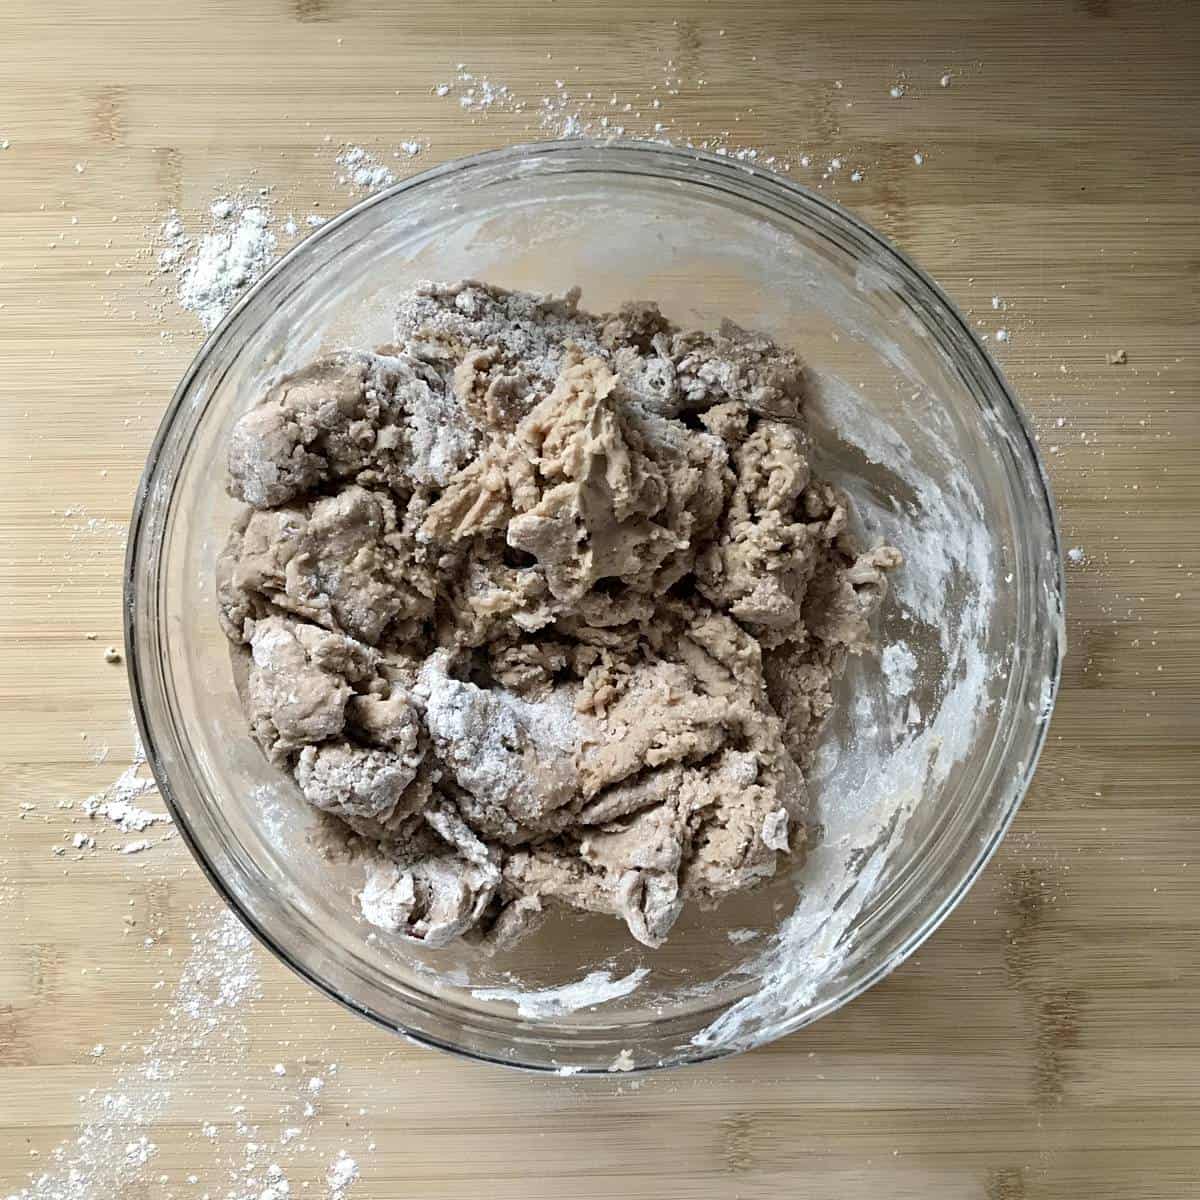 The biscotti cookie dough in a bowl.